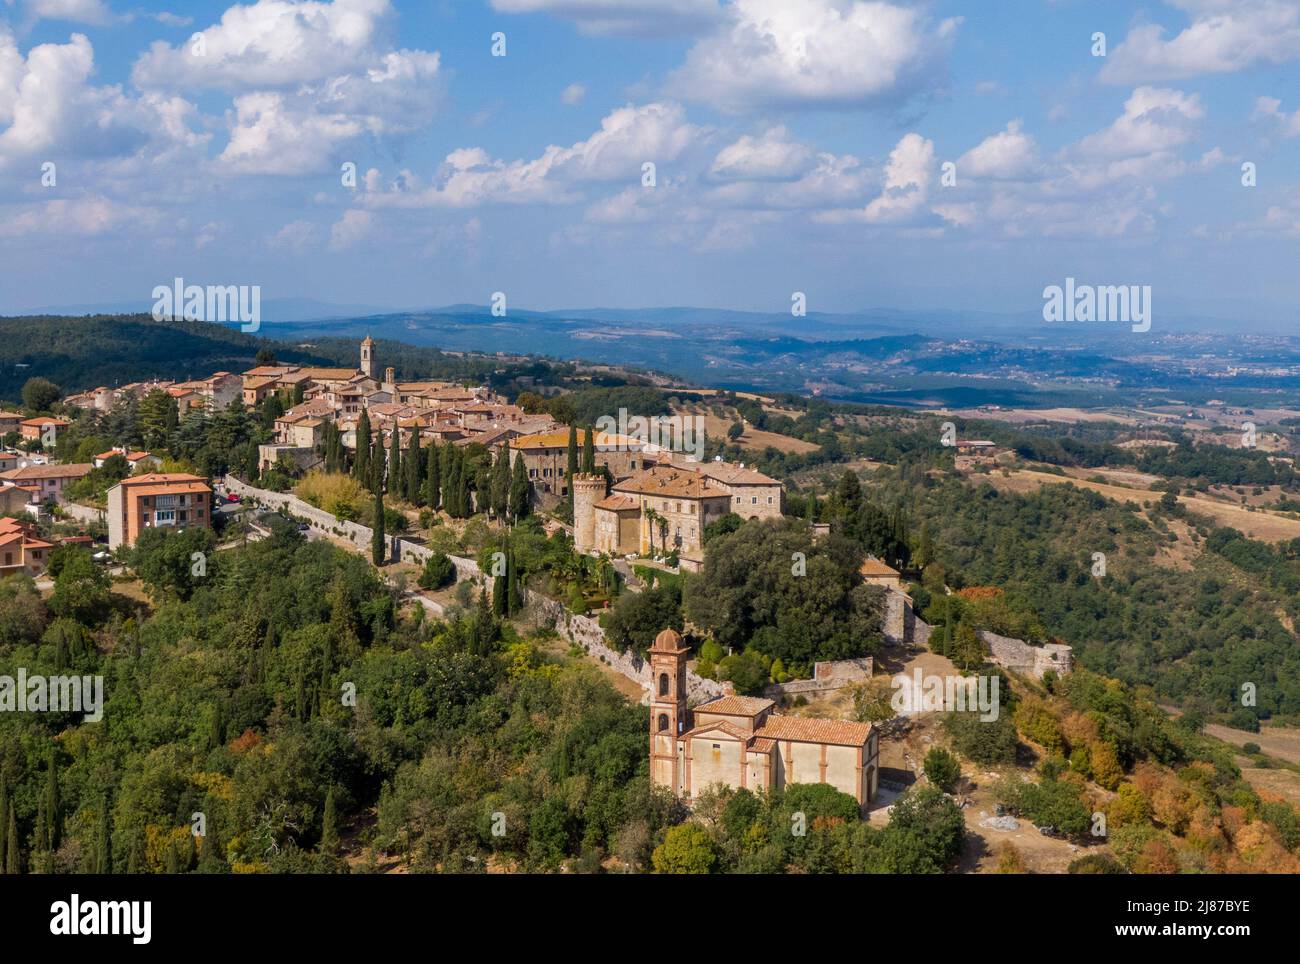 Aerial view of the historical town of Montefollonico Stock Photo